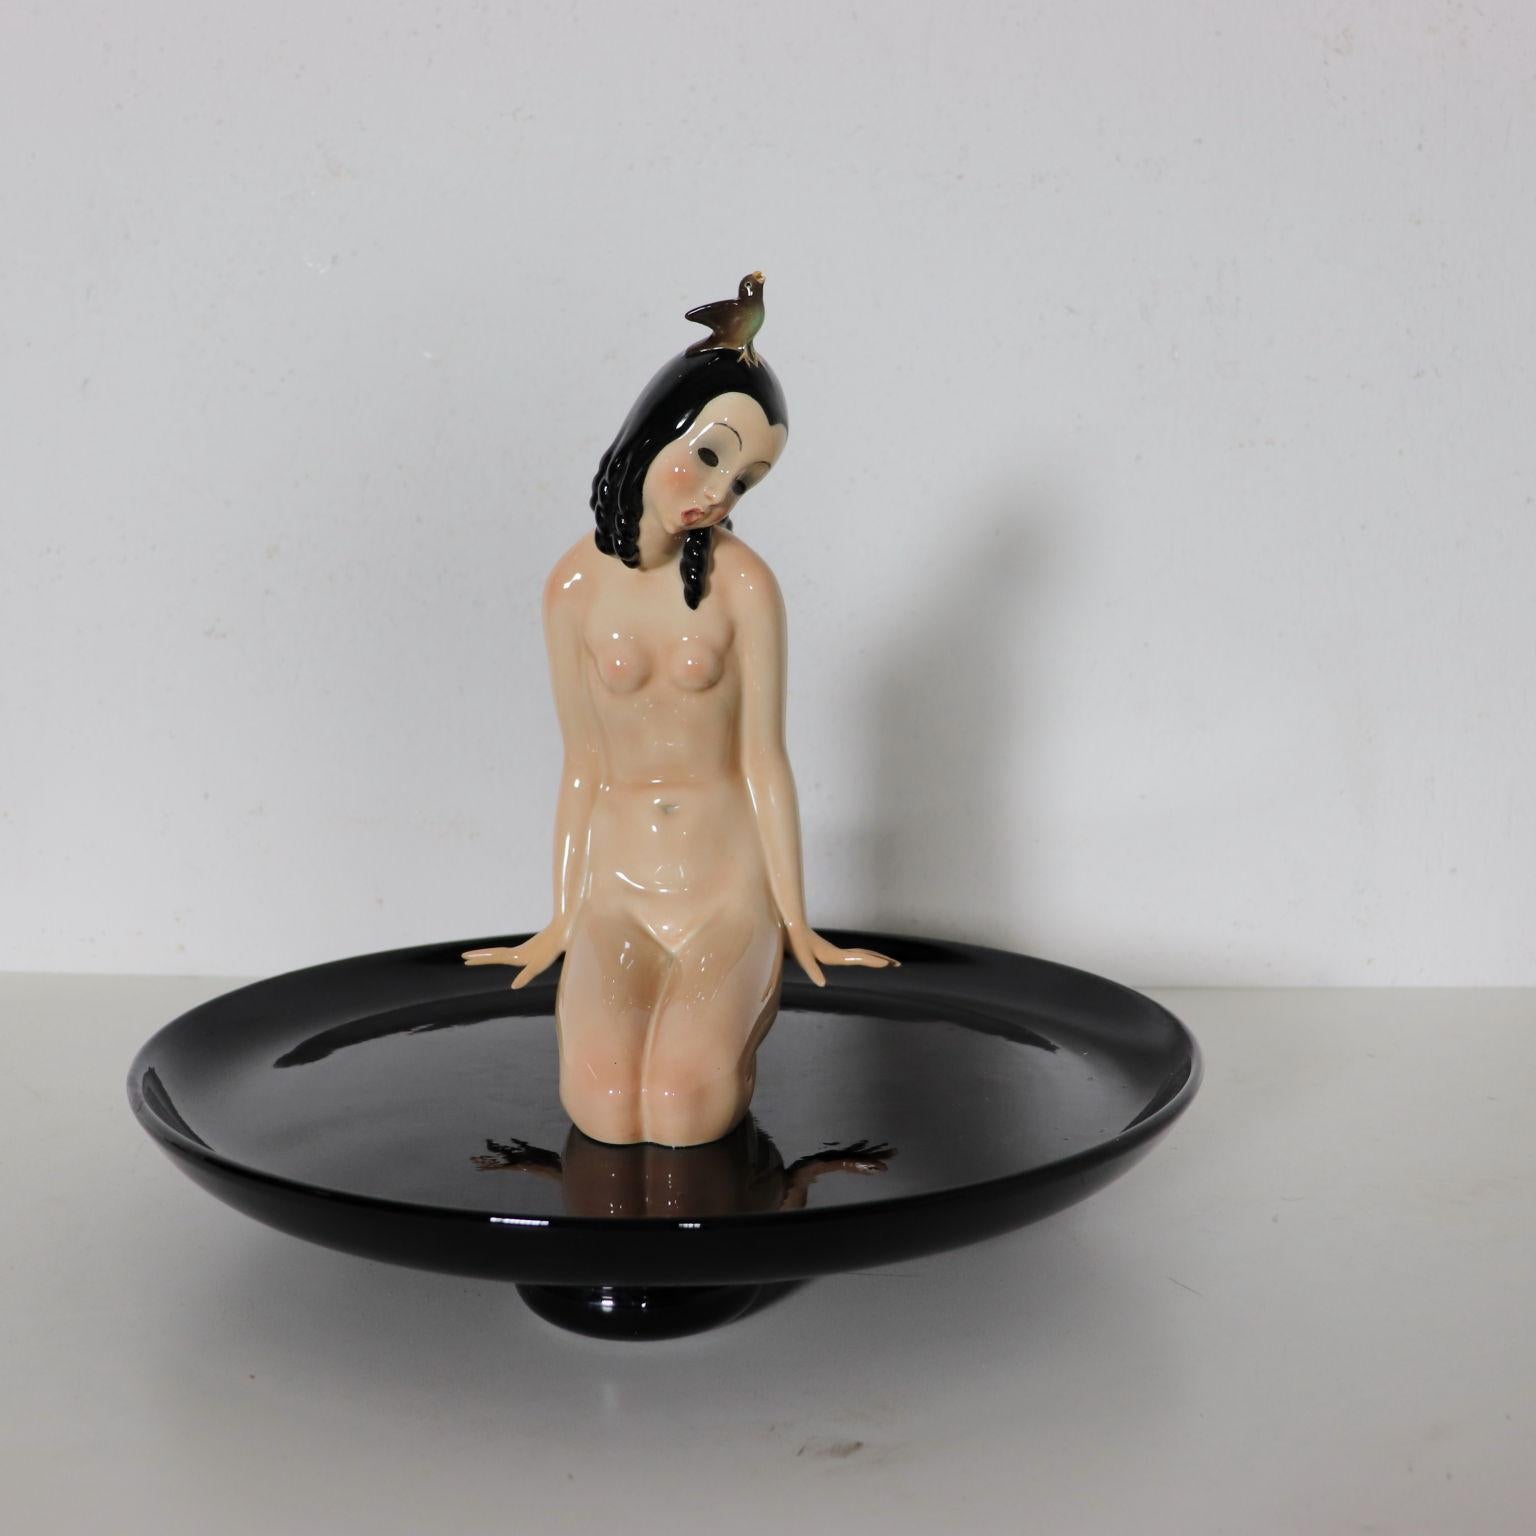 Naked woman with bird on a plate; painted Majolica earthenware sculpture. Manufacturing brand and tag under the base,.